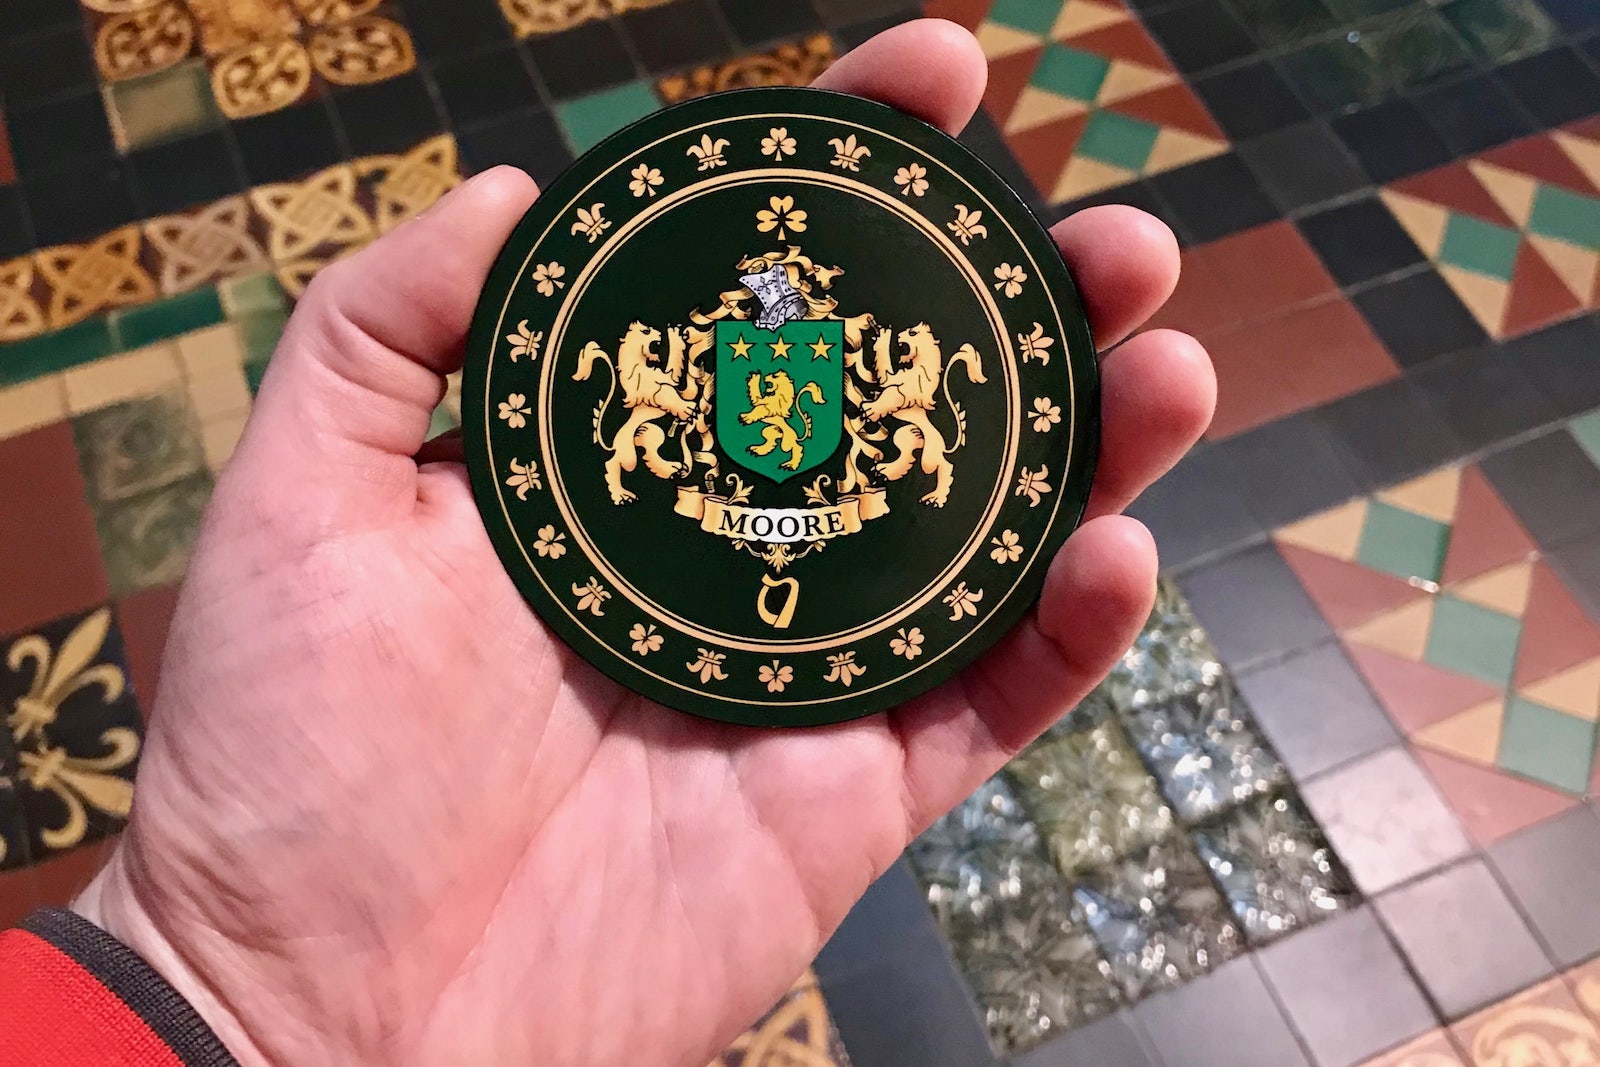 Judson holds the Irsh family crest for Moore. Two golden lions flank a green shield with three golden stars and a golden lion on it